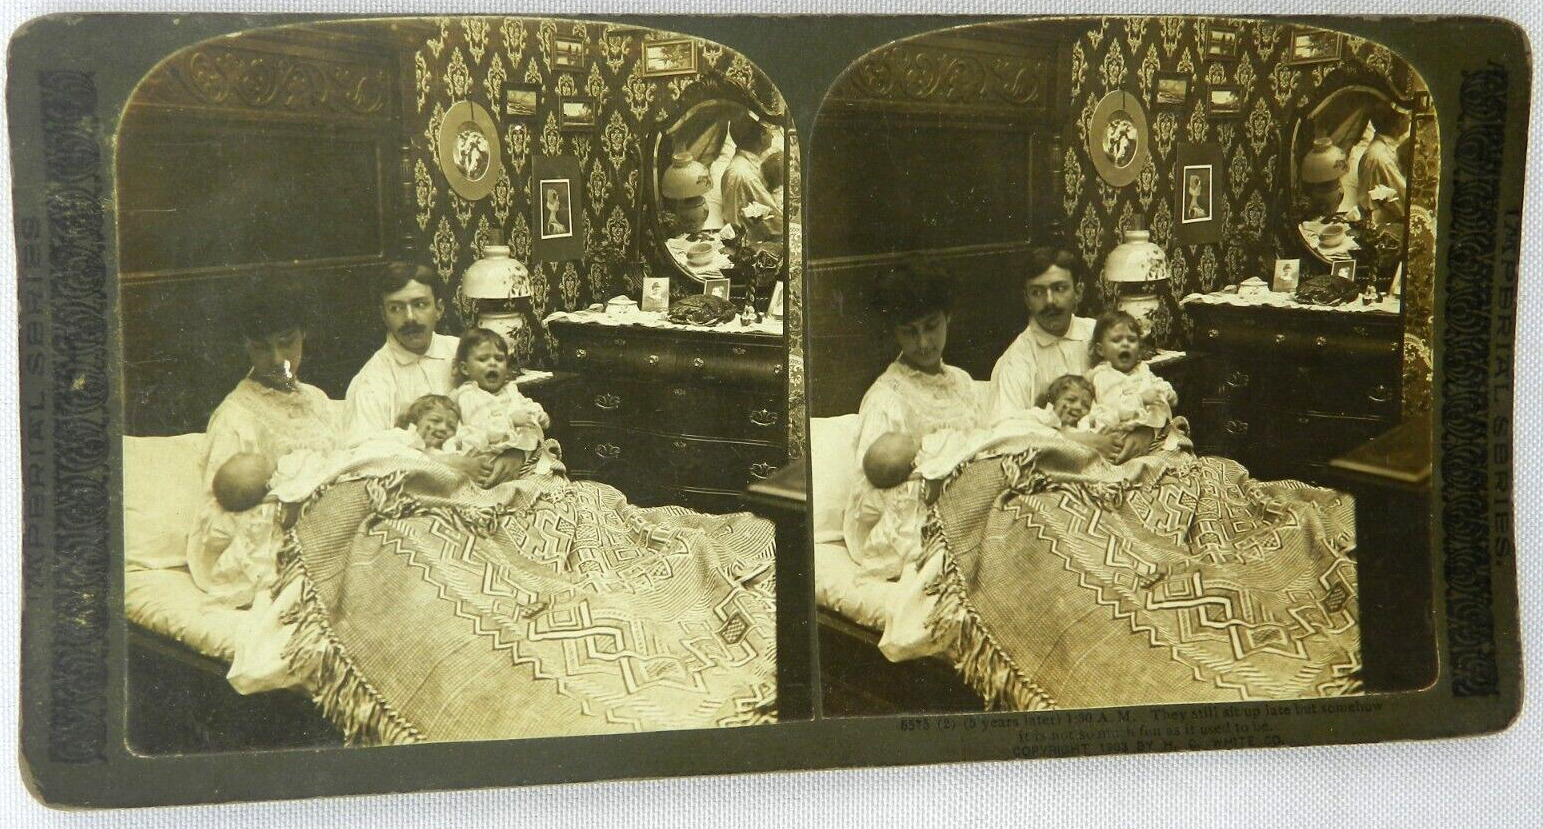 Young Family Bedroom in Quilt with Infant Child - Stereoview Card - Stereoscope